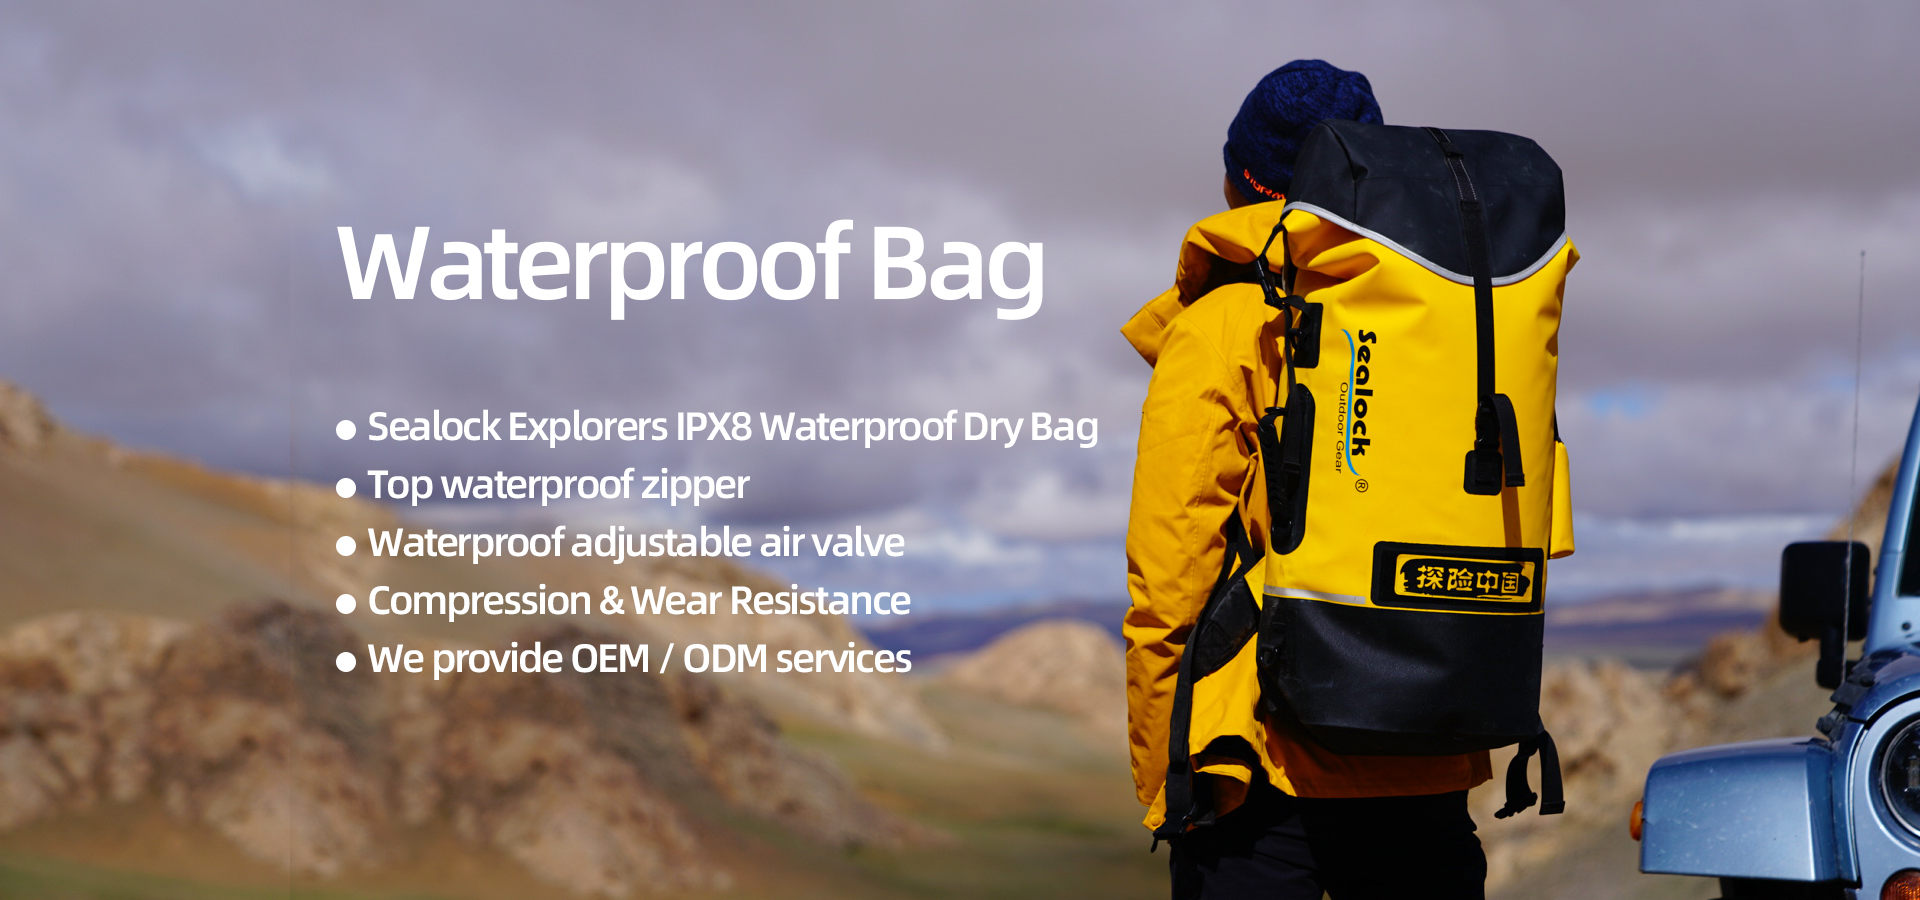 Waterproof bag, Dry bag, Welded bag, Welded cooler bag, Welded ice bag, Dry  backpack Suppliers and Manufacturers From China or Vietnam